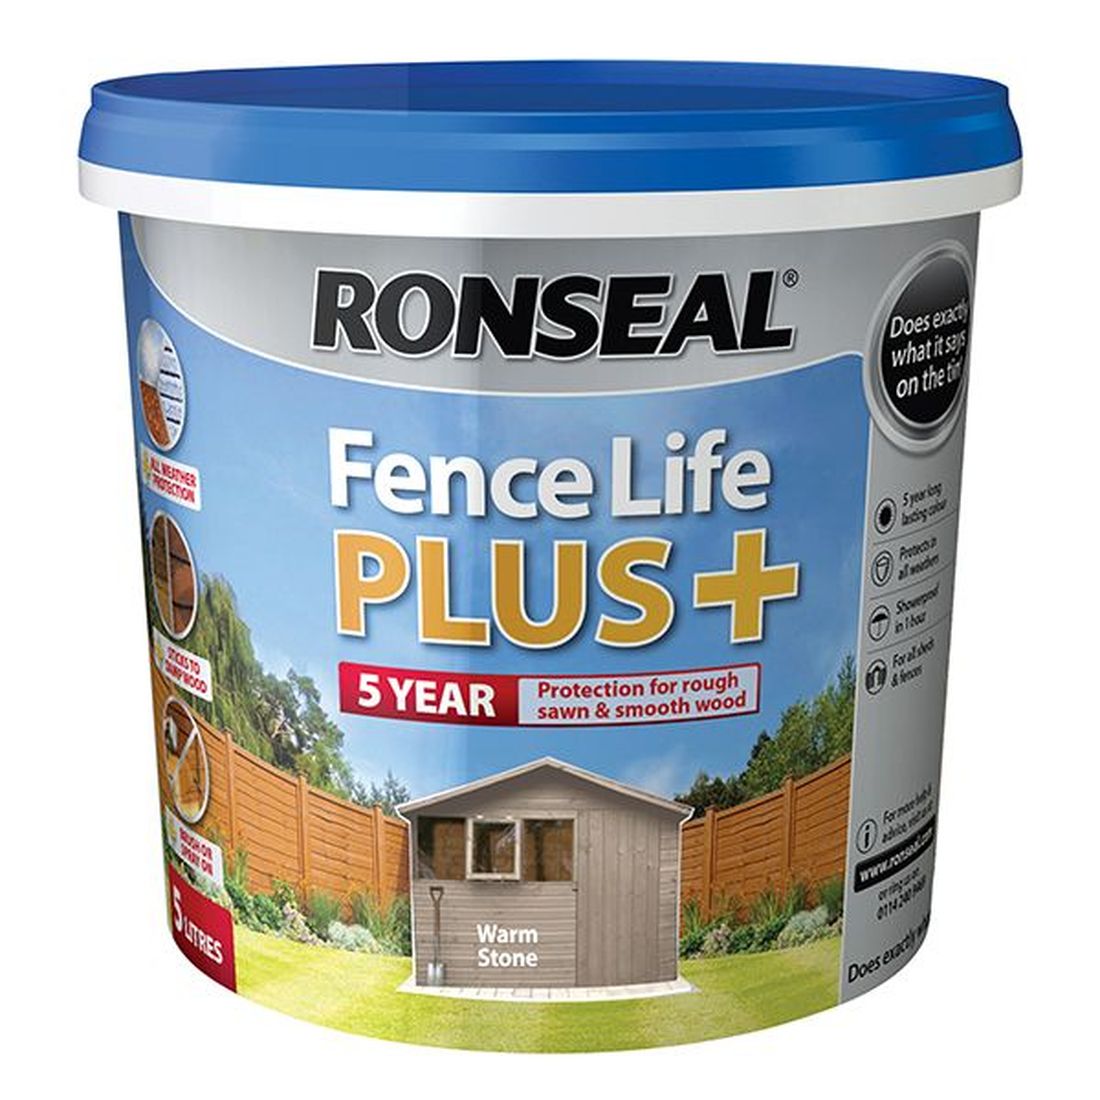 Ronseal Fence Life Plus+ Warm Stone 5 litre                                             